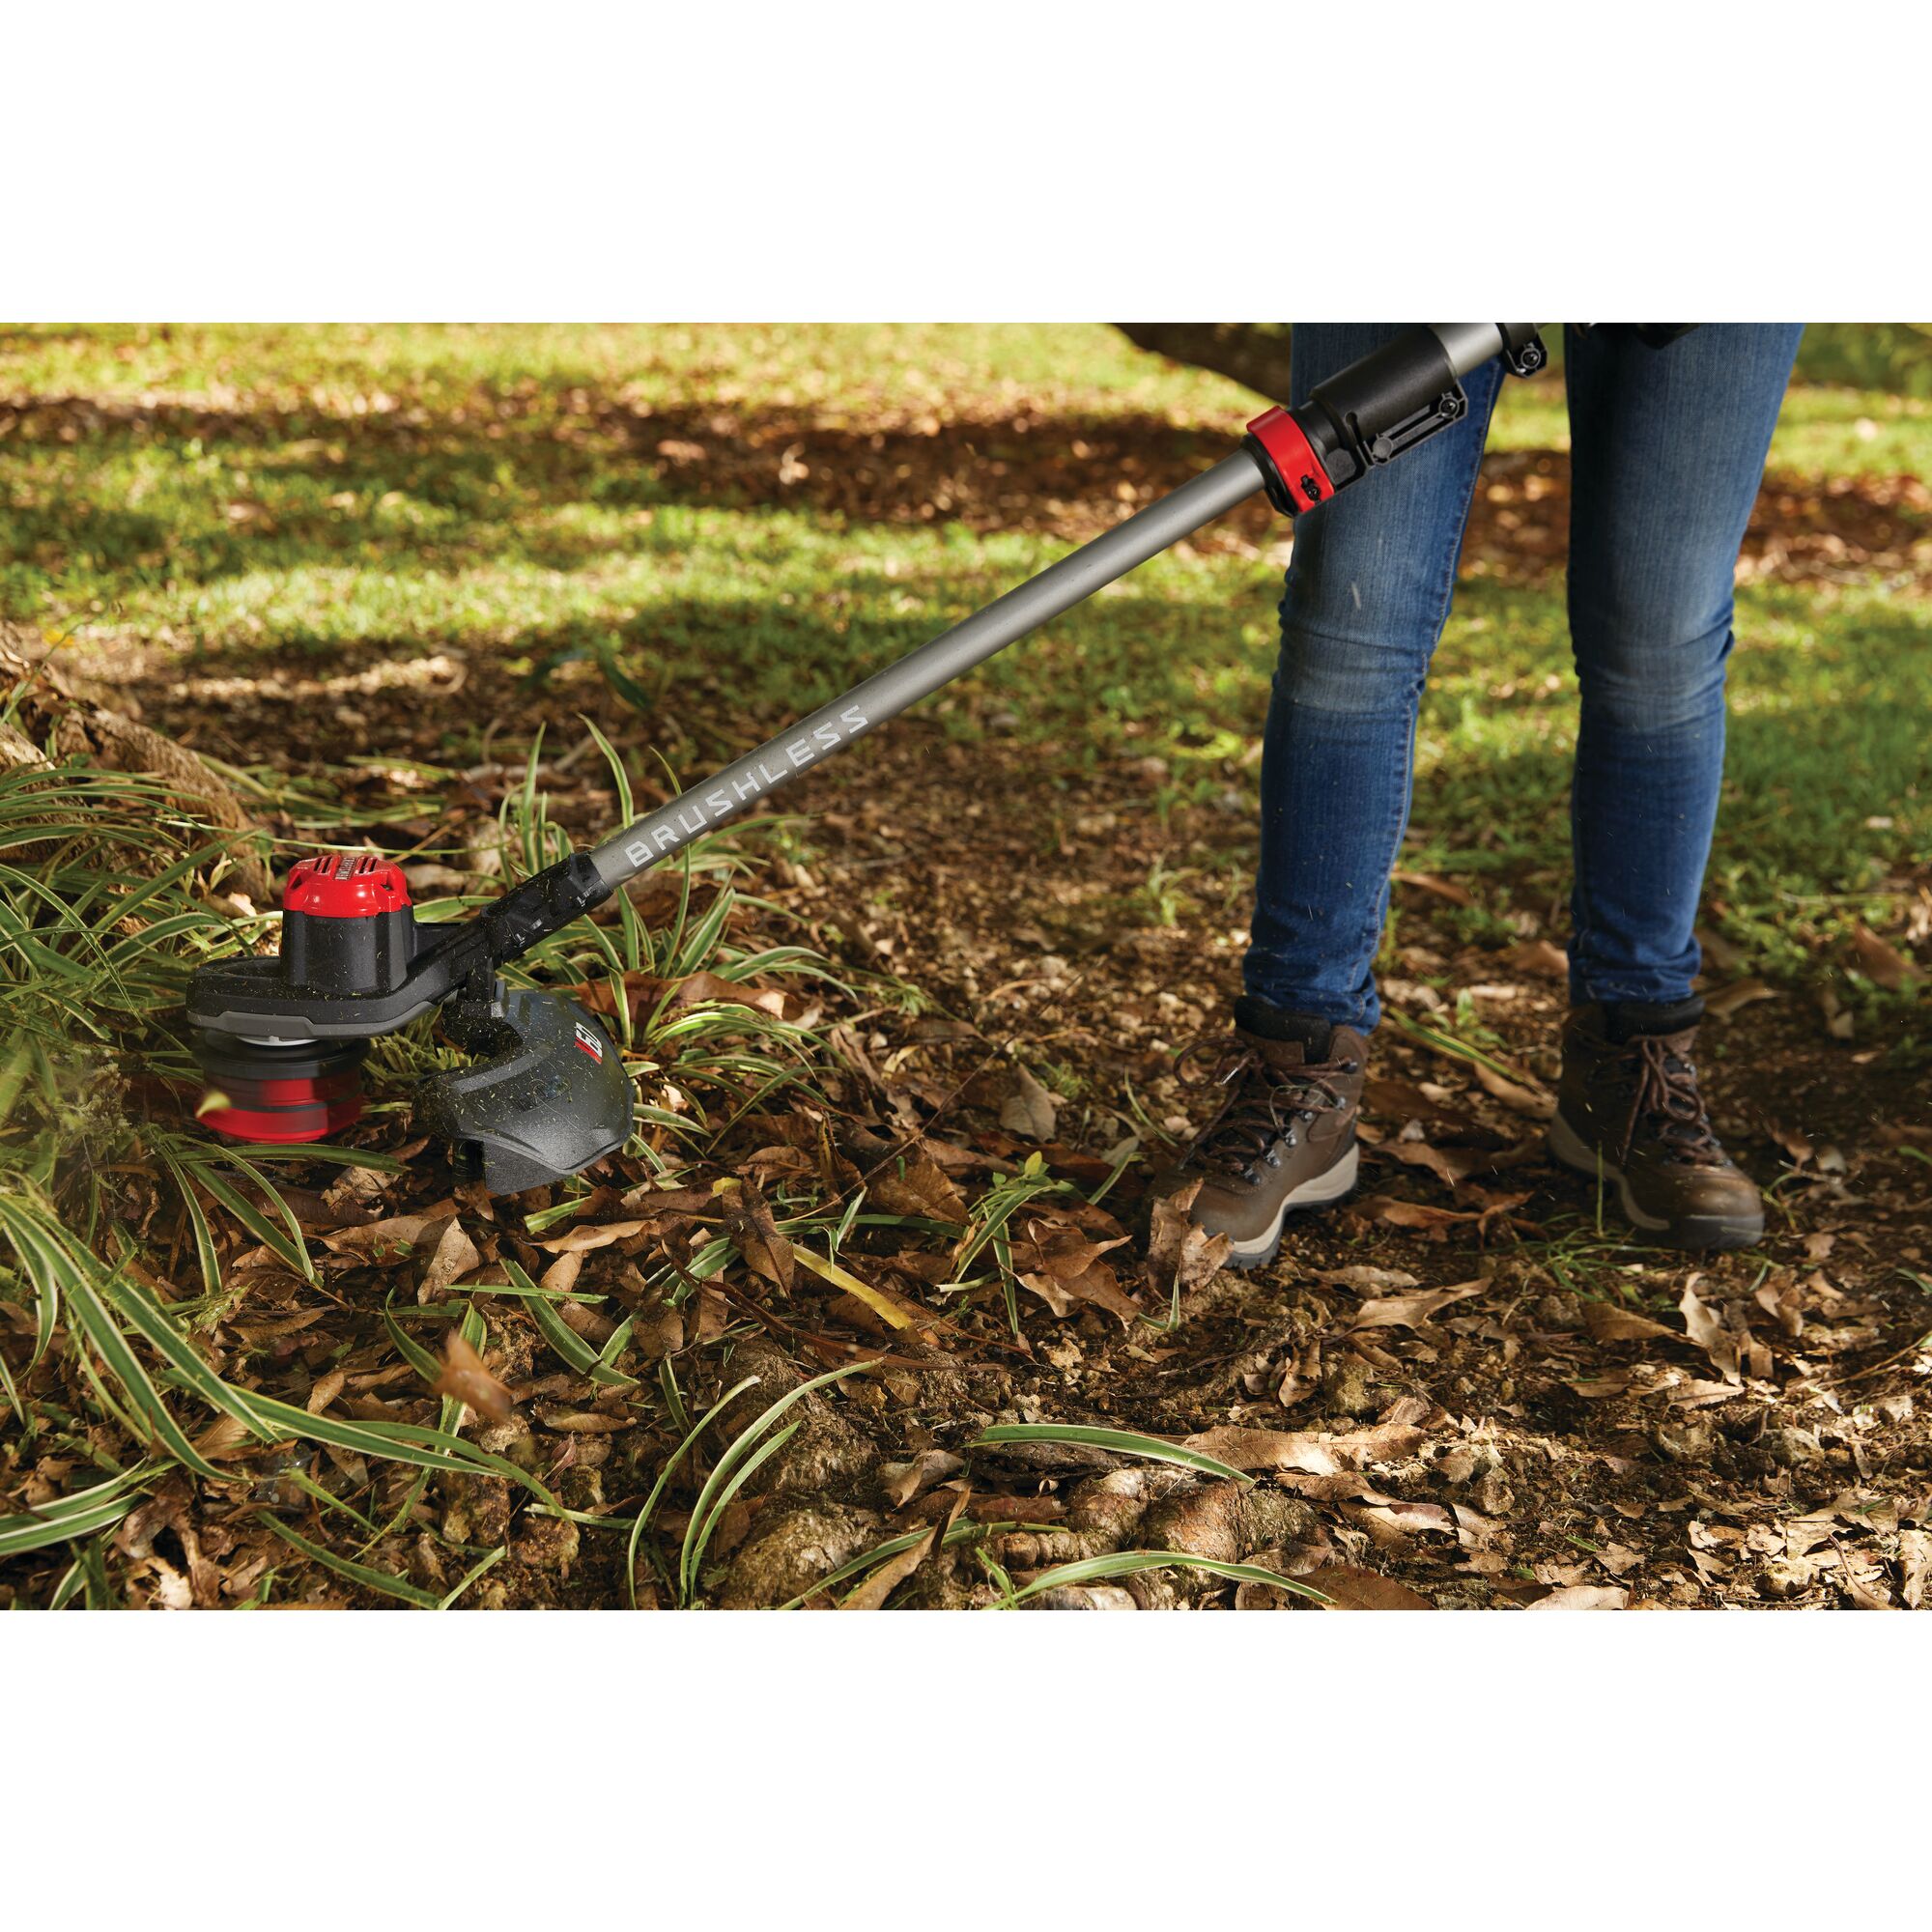 15 inch cutting swath feature of 60 volt cordless 15 inch brushless weedwacker string trimmer with quickwind kit 2.5 ampere per hour.